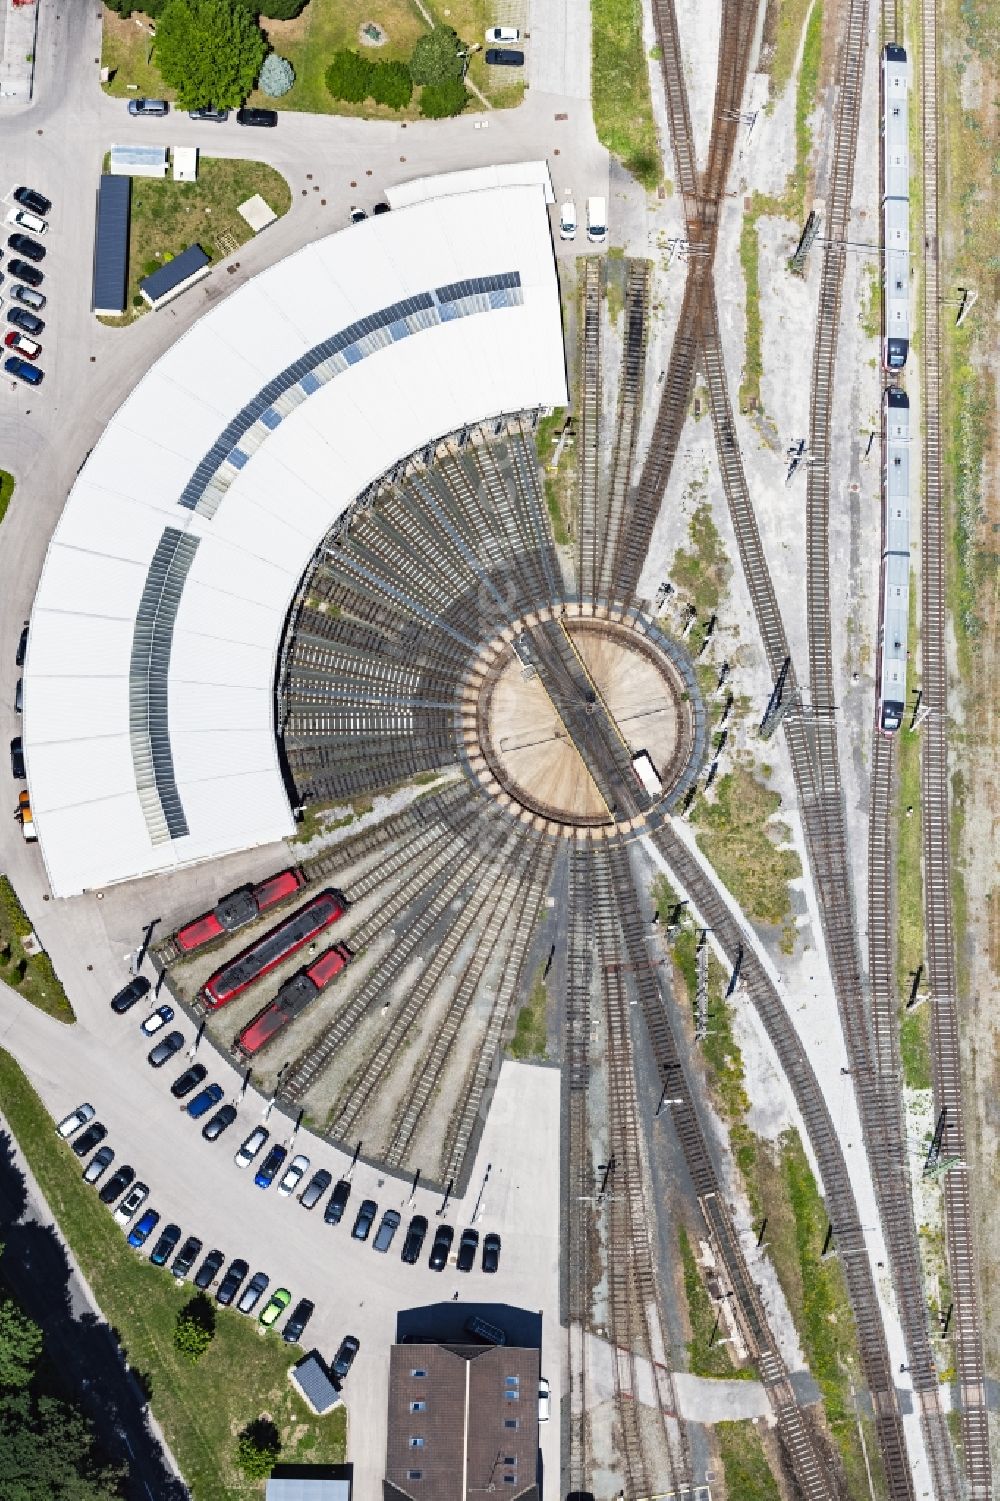 Villach from the bird's eye view: Railway depot and repair shop for maintenance and repair of trains of passenger transport of the series in Villach in Kaernten, Austria